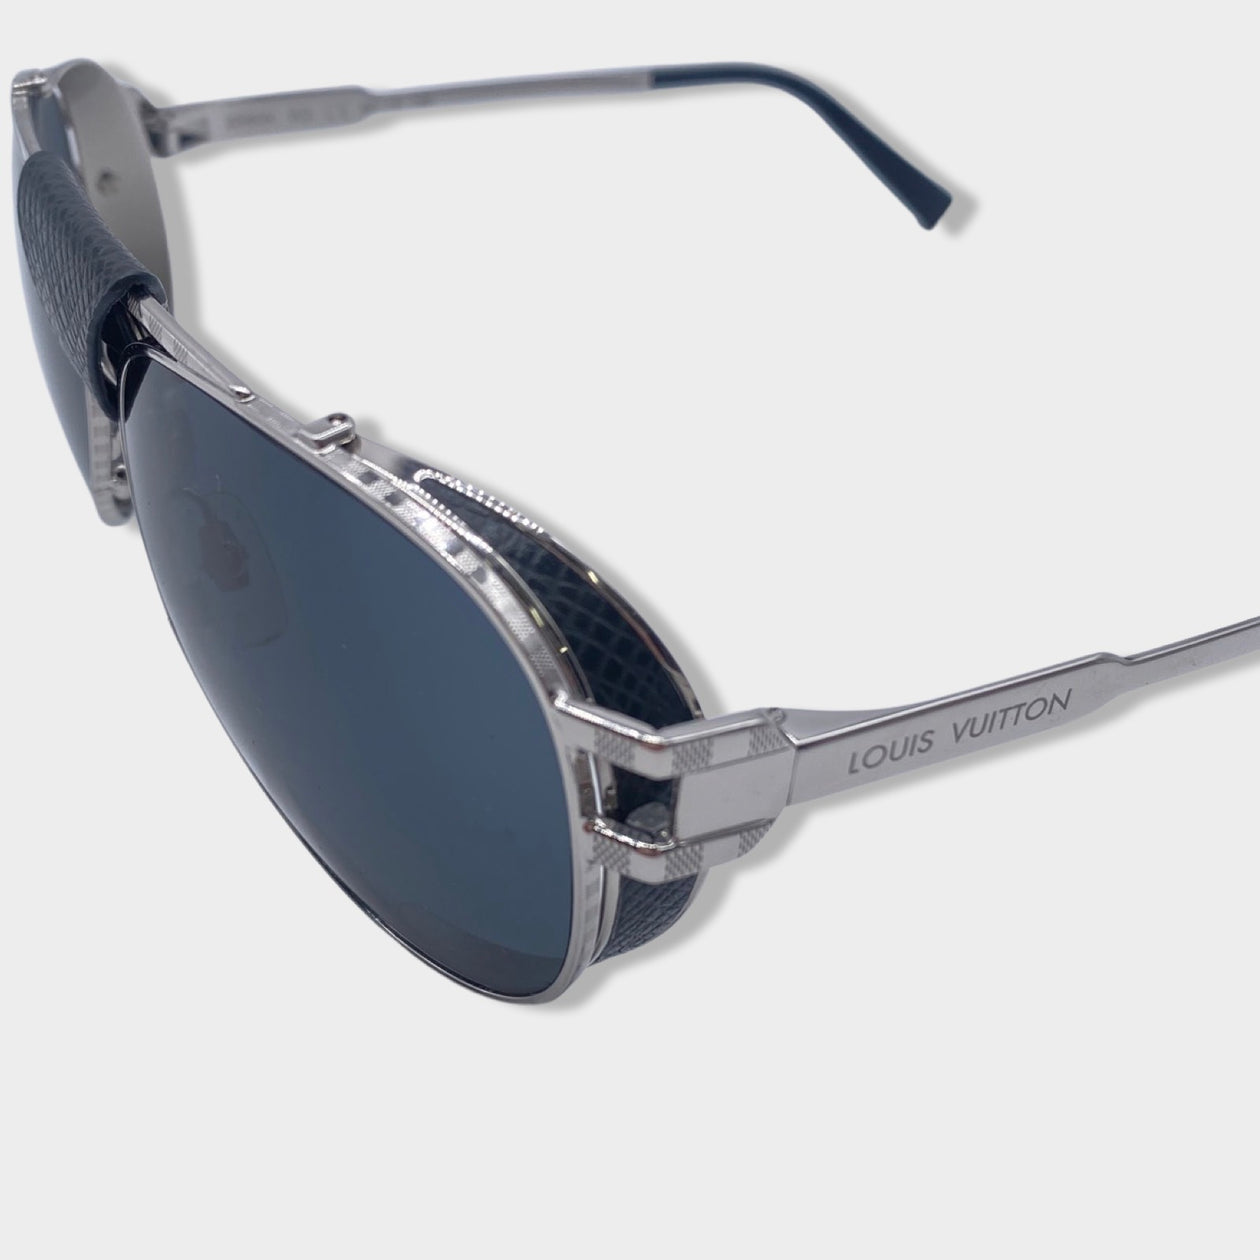 LOUIS VUITTON Aviator grey silver sunglasses with leather details